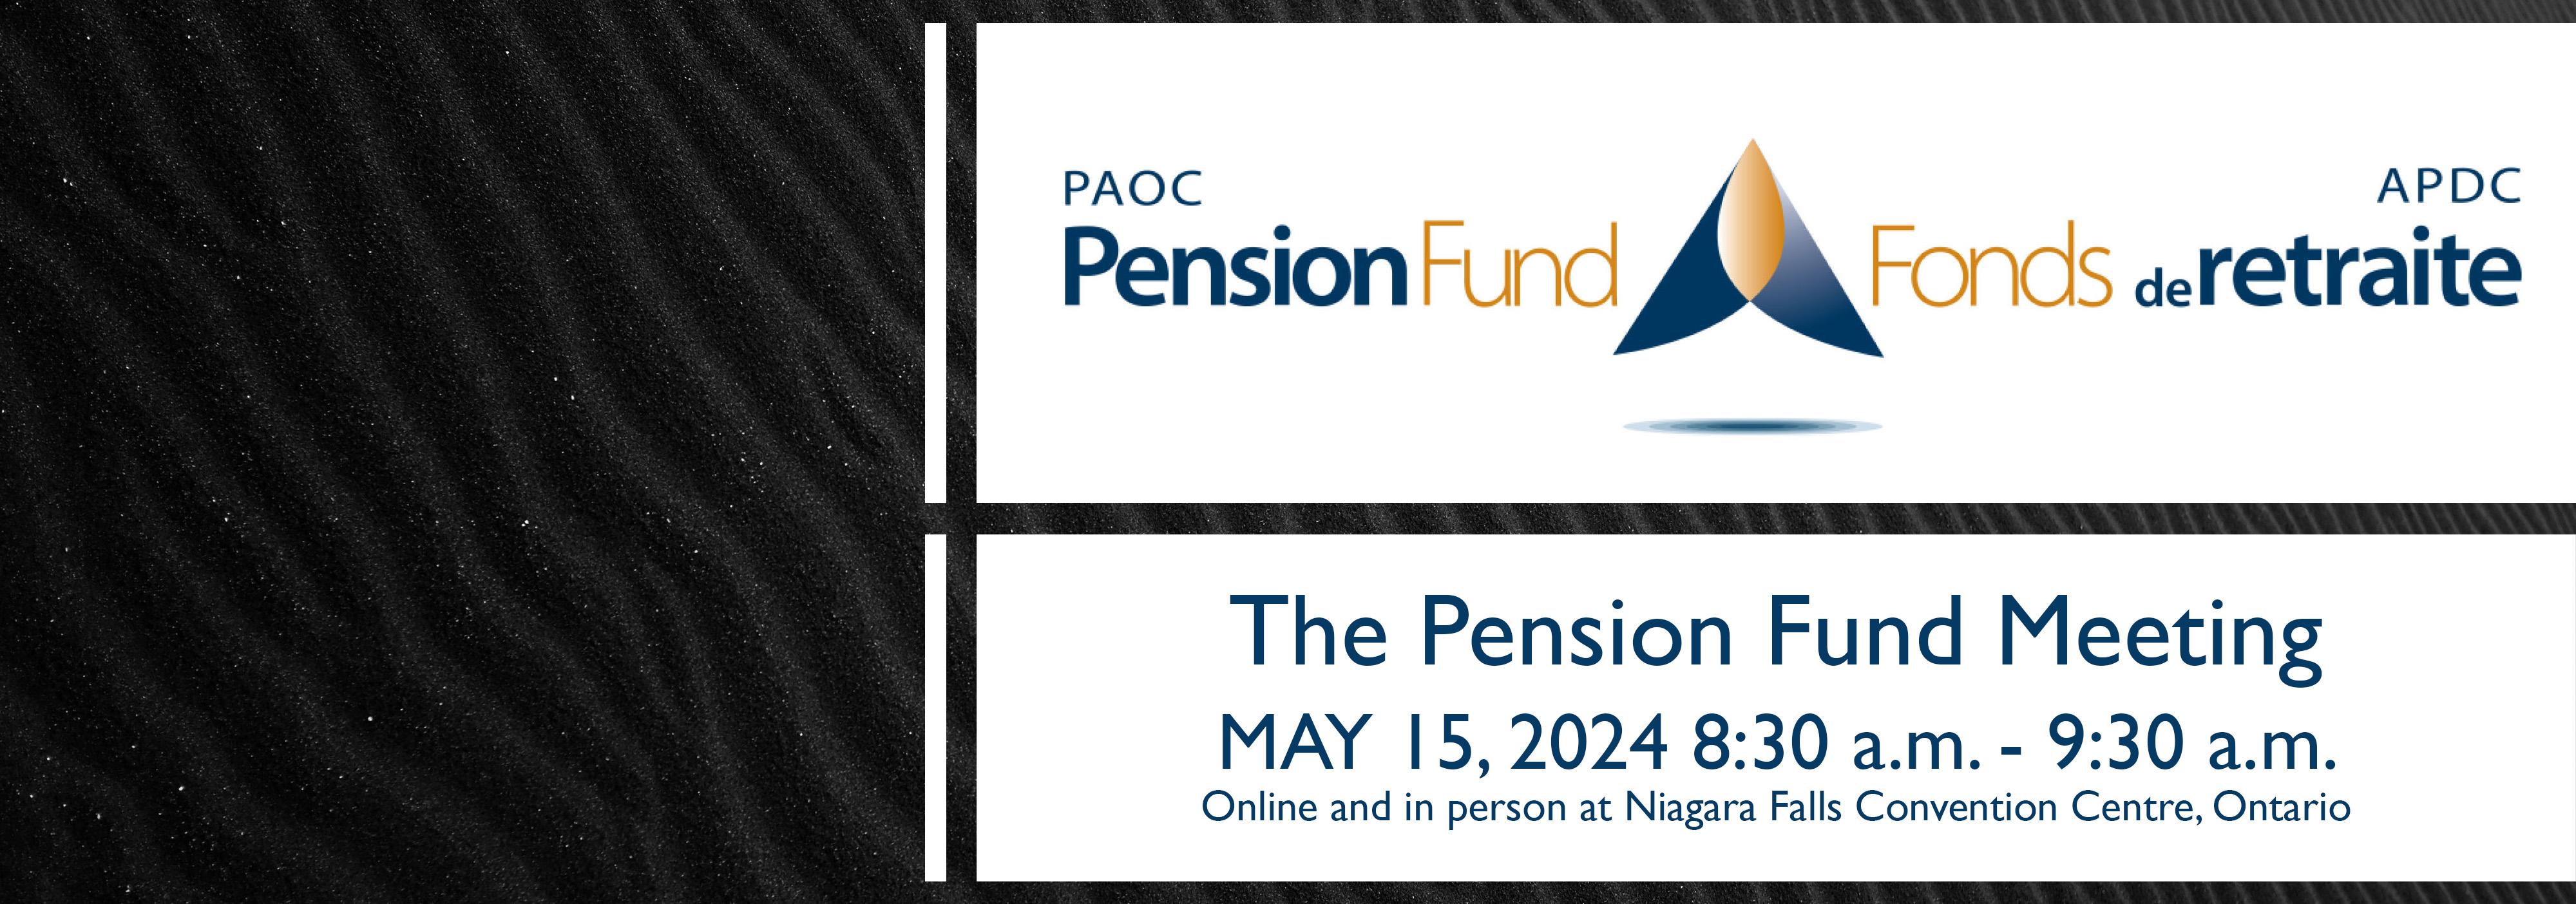 PAOC Pension Fund - The pension fund meeting May 15 2024 8:30 - 9:30 am EDT, online and in person